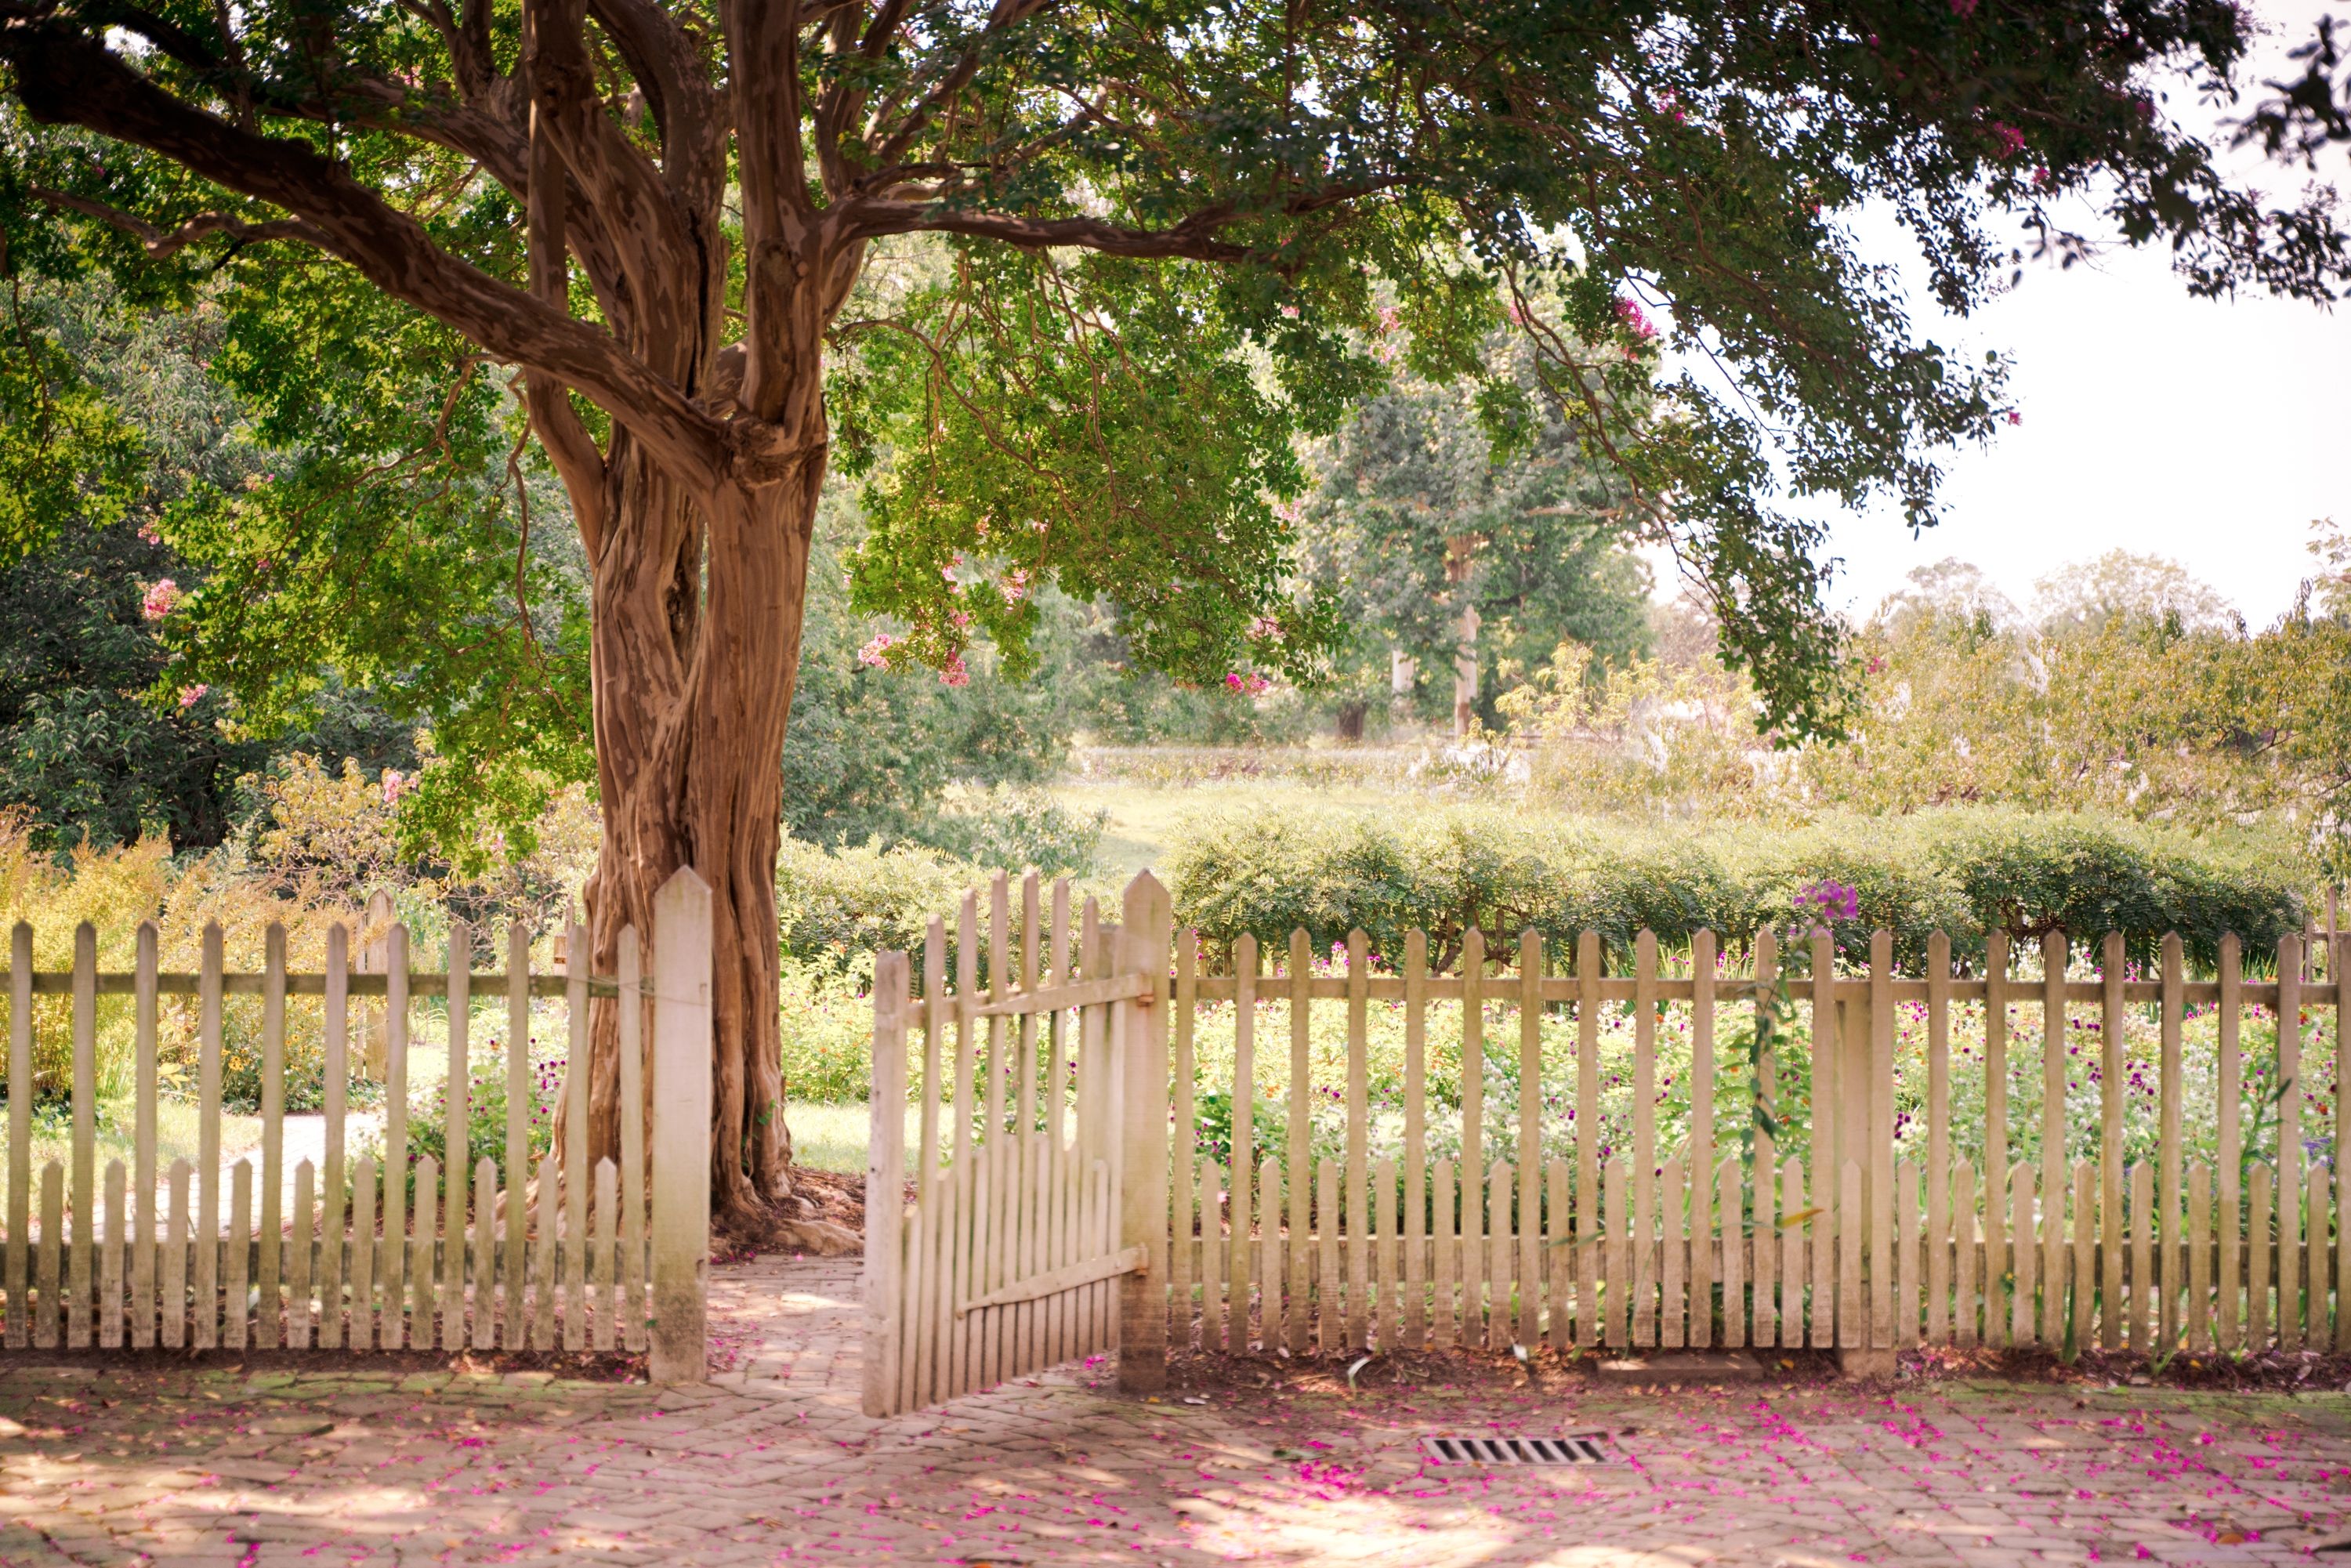 4 Charming Picket Fence Ideas For Your Landscape